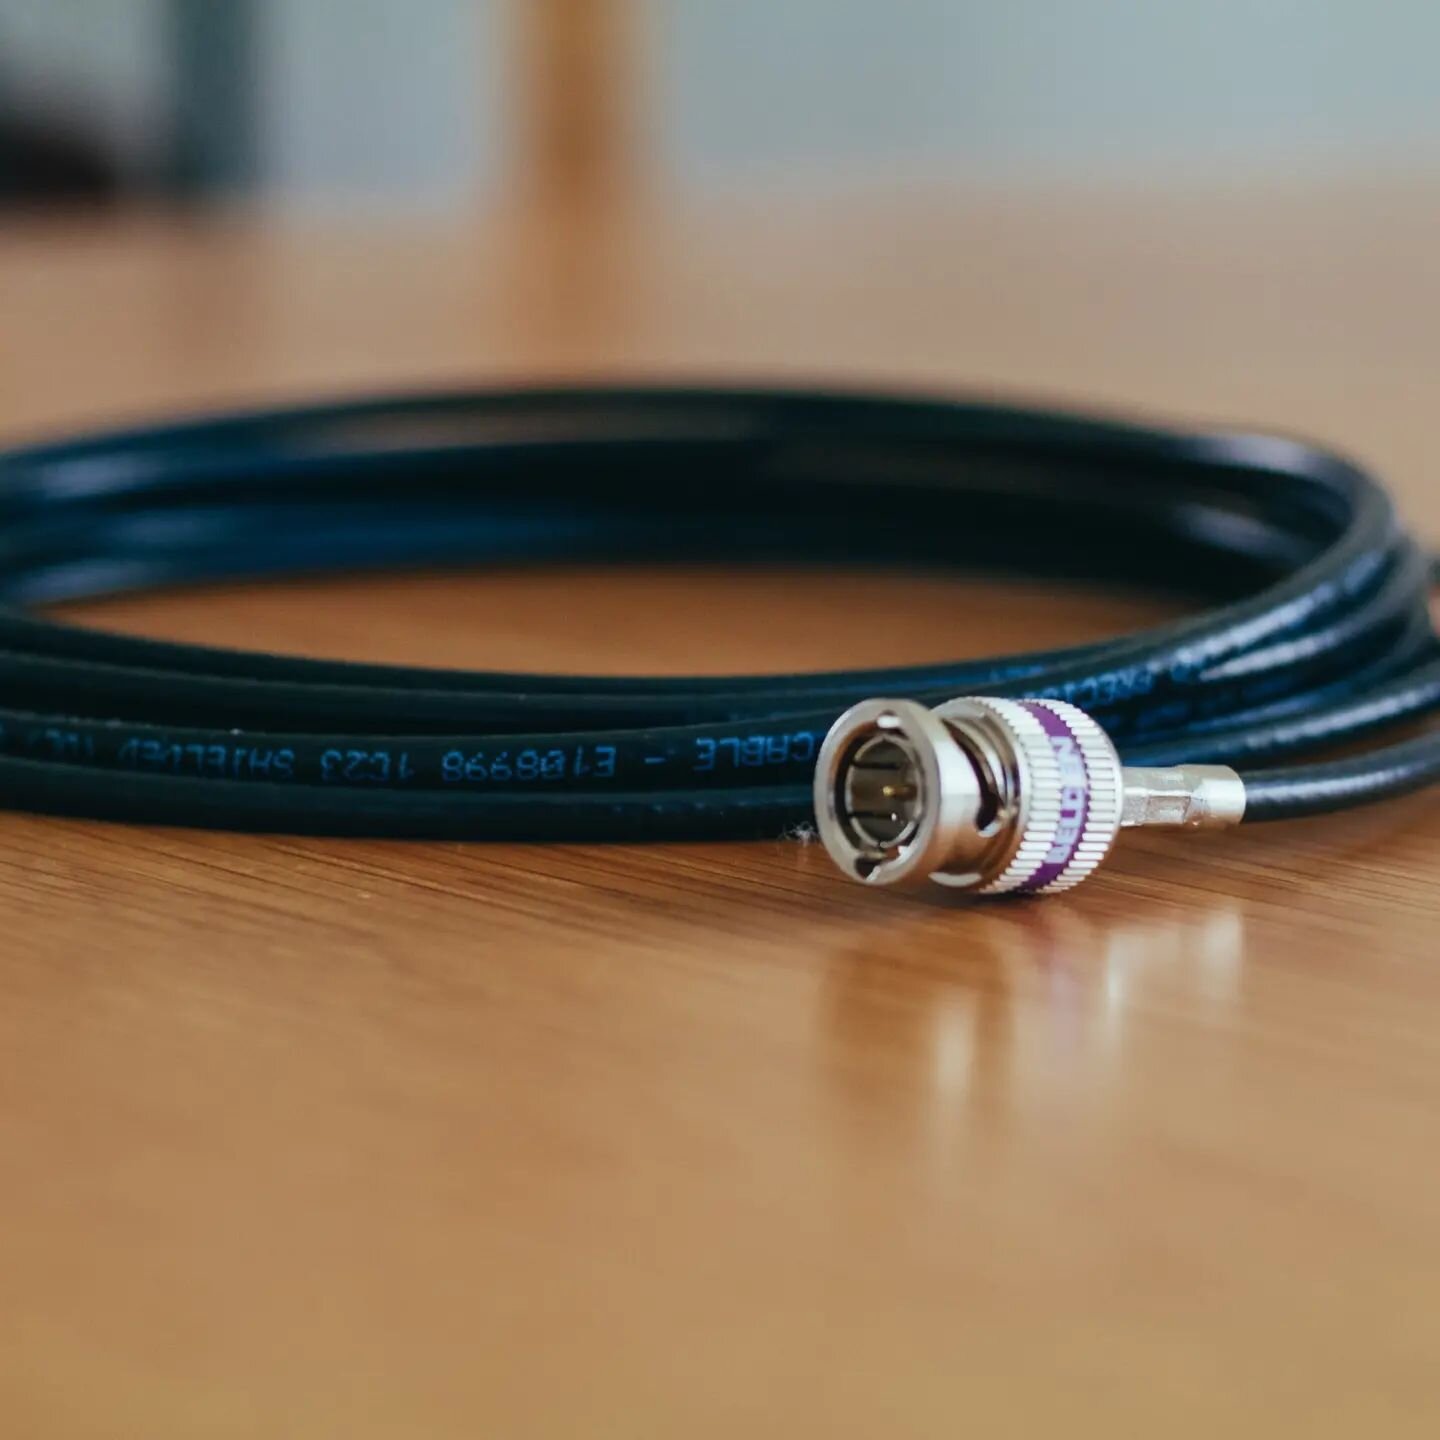 We can also make long run 12G-SDI. This one's only a 3.5m for an edit suite but we can run a 12G signal through this skinny cable up to 45m! Or up to 95m with a 3G signal! We can also do longer runs using a thicker cable. DM us for more info!